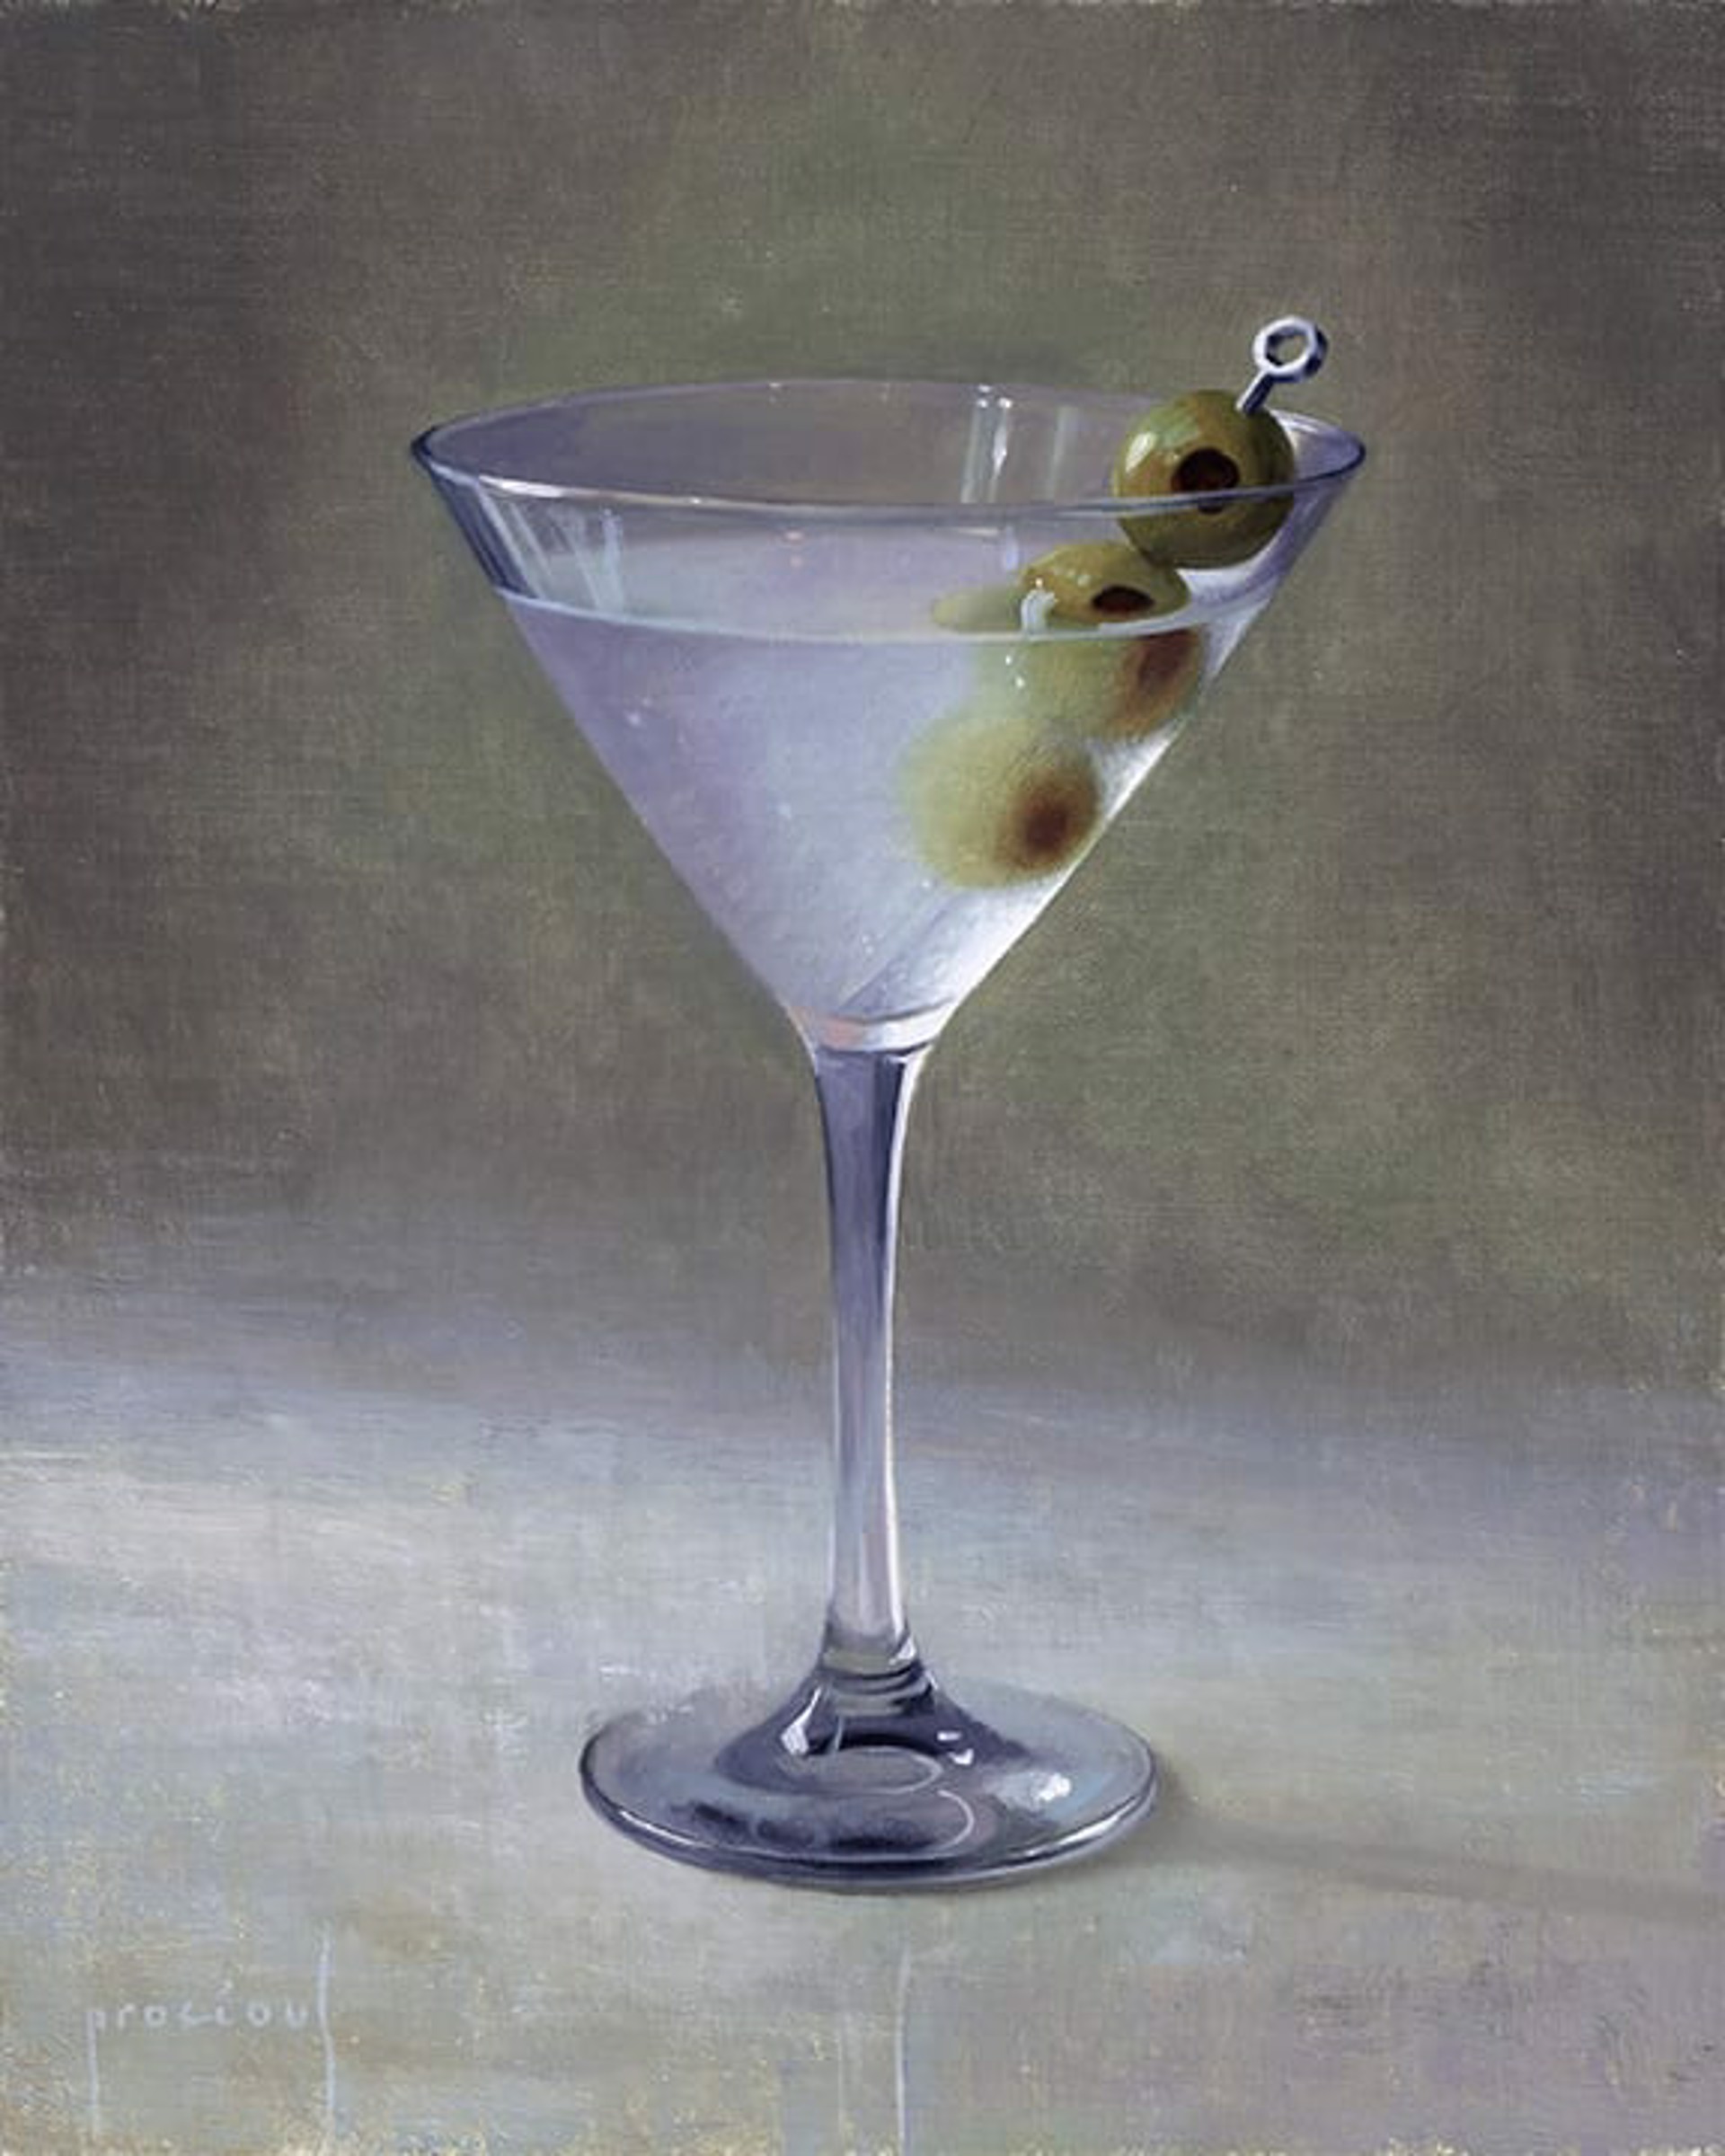 Shaken Not Stirred by Cindy Procious